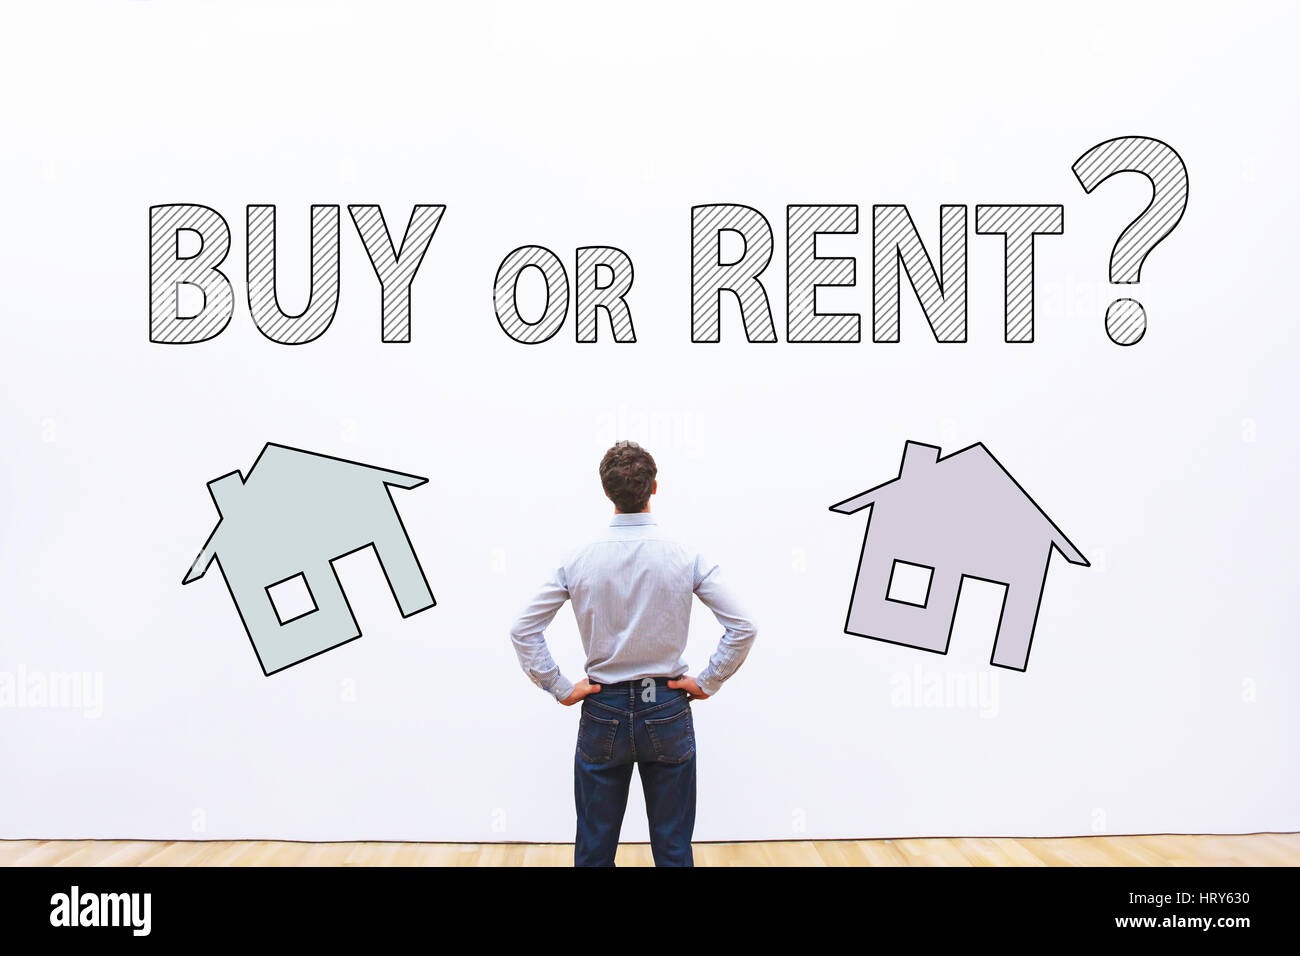 buy or rent concept, real estate question,  businessman making decision Stock Photo